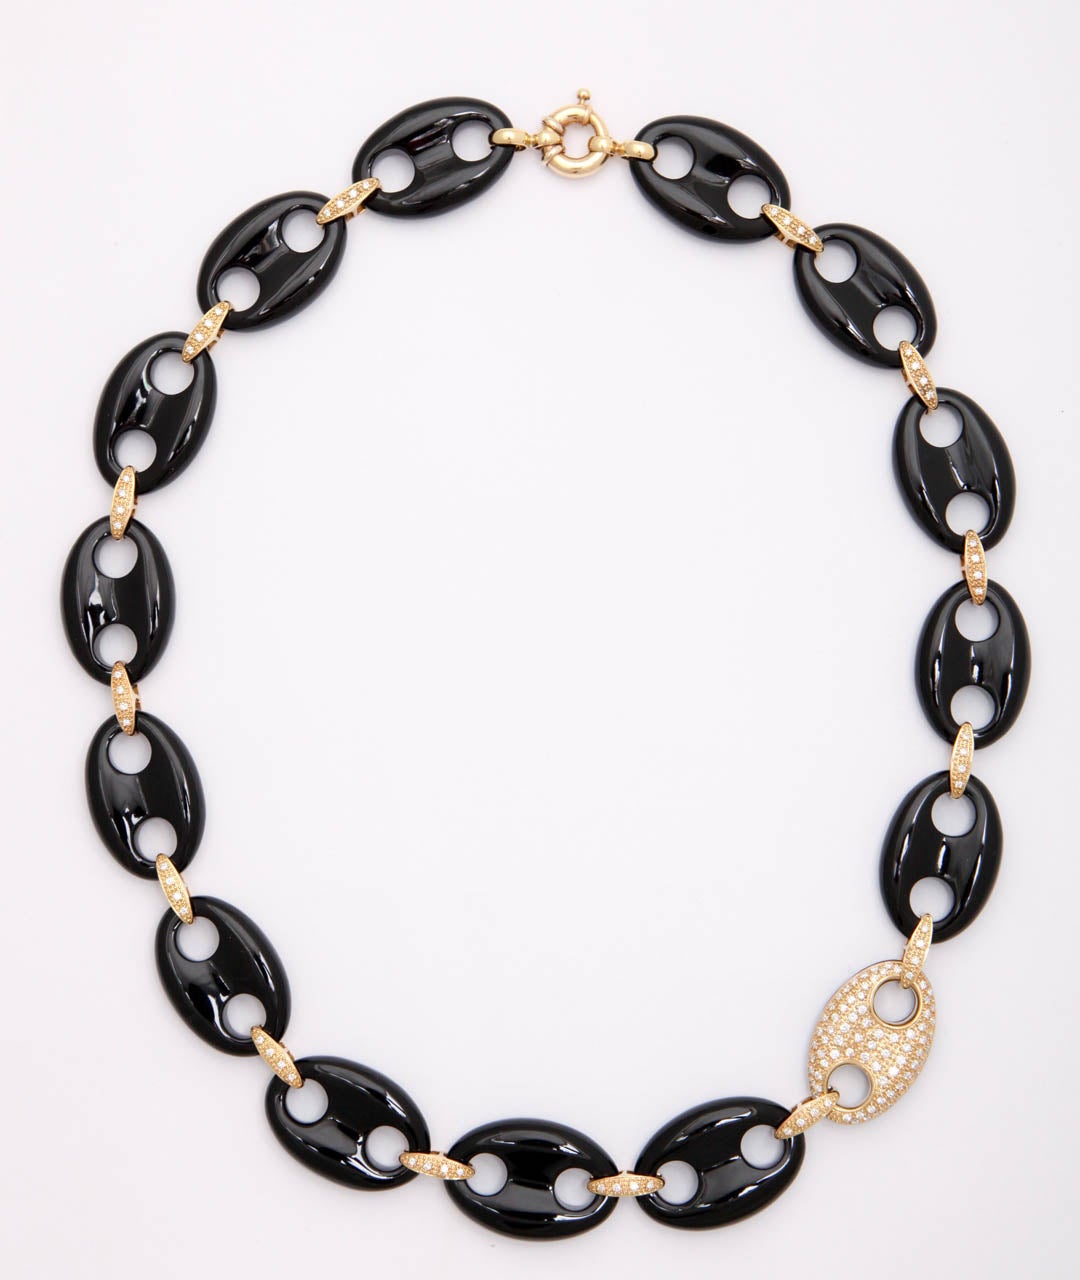 Updated version of the Anchor Chain.  Carved Black Onyx sections connected by 18kt Yellow Gold & Pave Diamond connectors  with one random 18kt Yellow Gold & Pave Diamond Element falling to the front.  Clasped with a single Gold